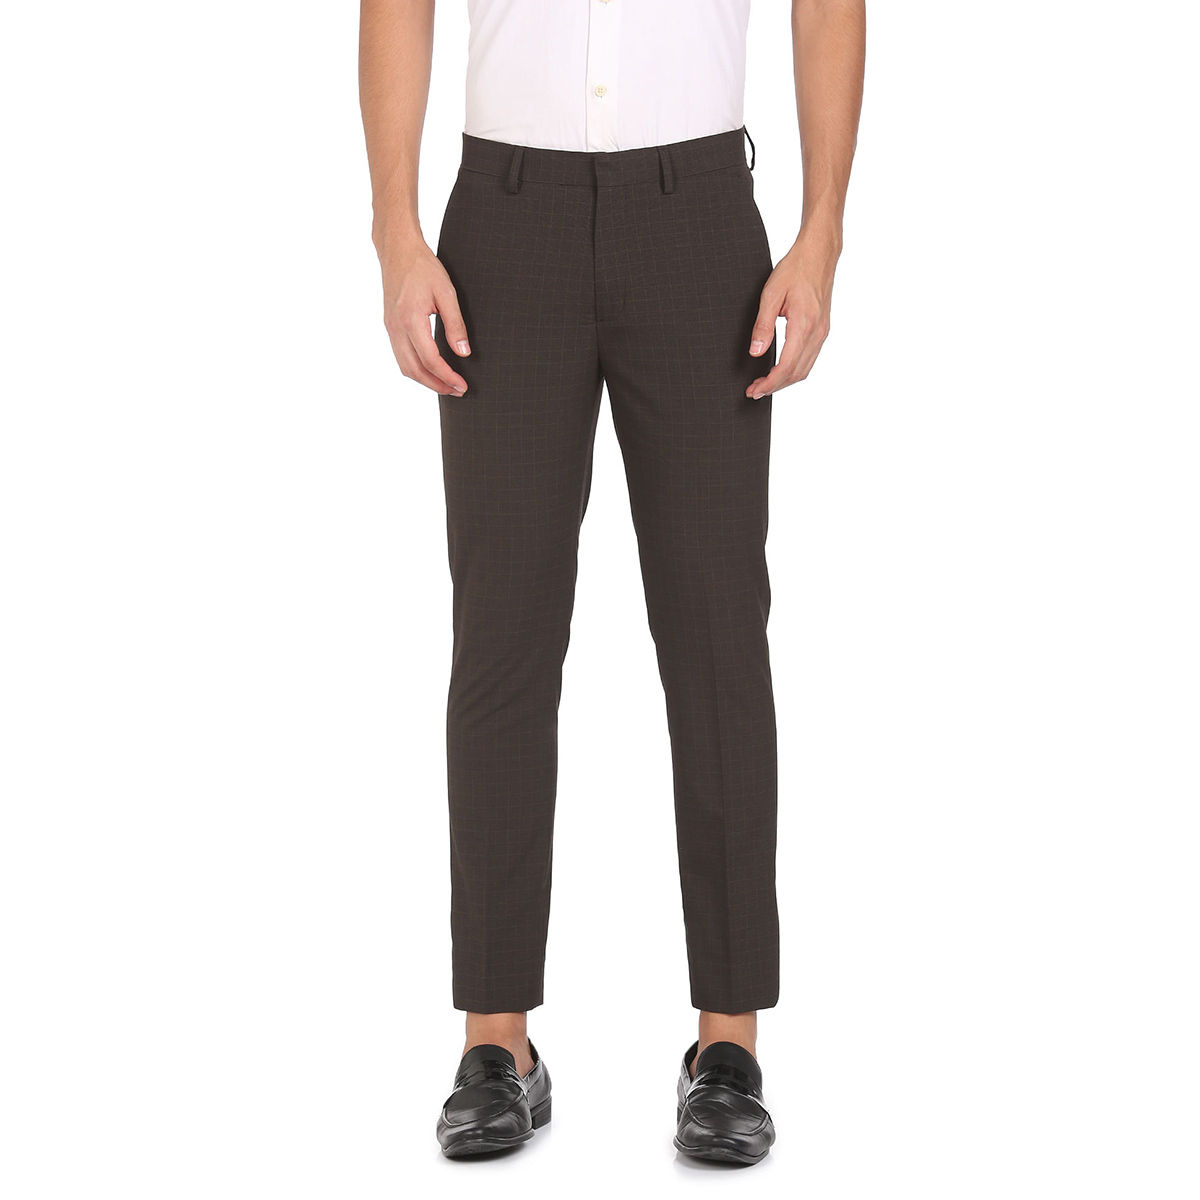 Buy Black Pants and Black Trousers Online at Best Prices in India